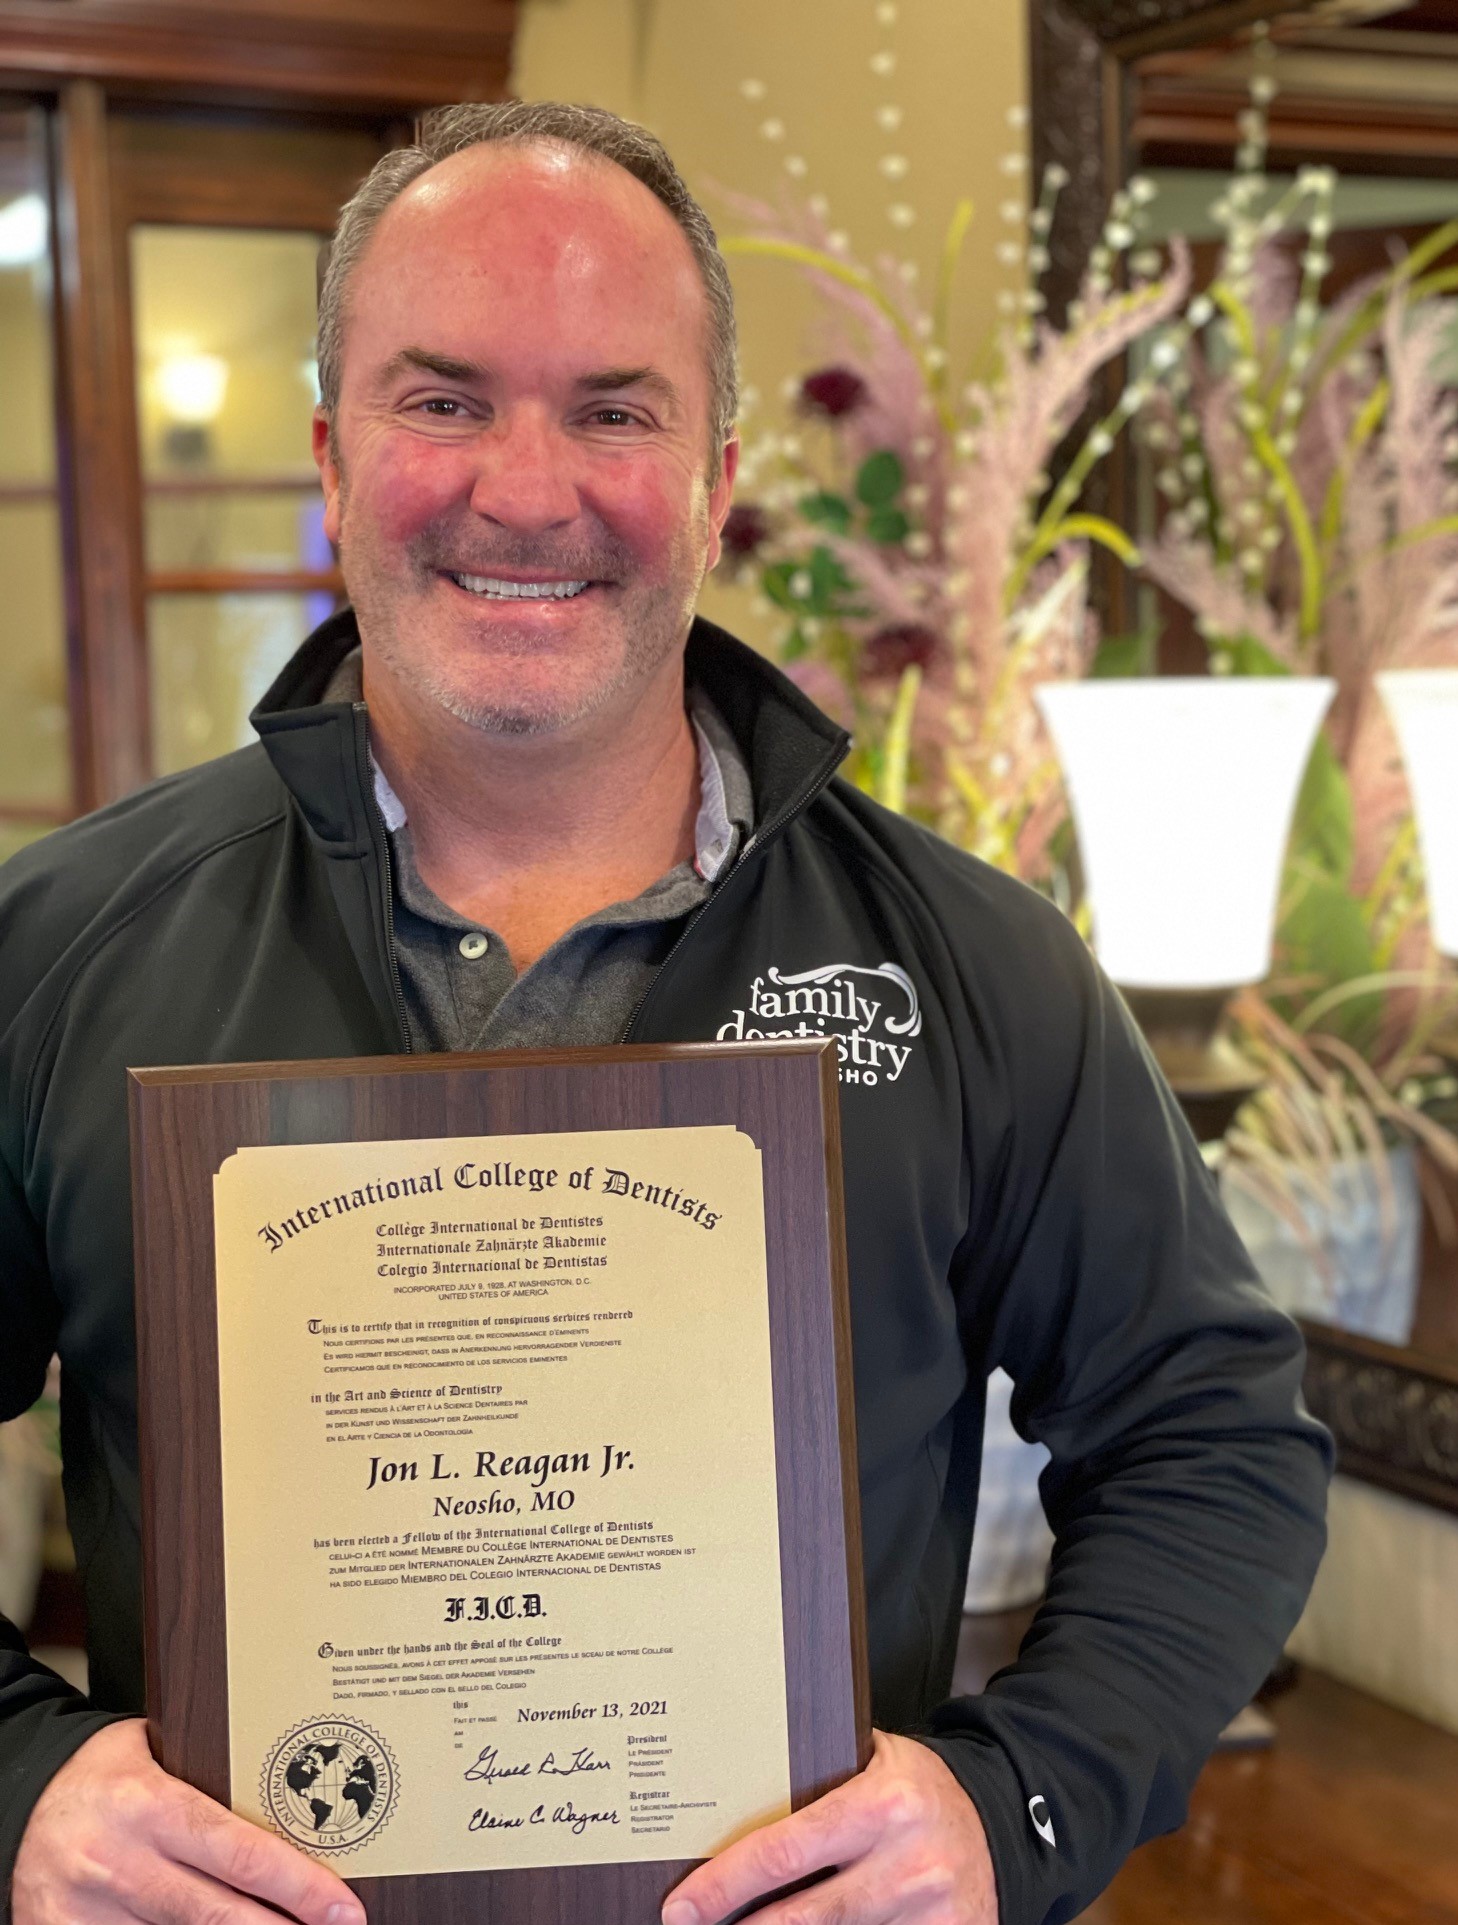 Image for The International College of Dentists USA Section presented a local practitioner, Dr. Jon Reagan with a membership plaque, a gold lapel pin and an engraved gold key symbolic of this Fellowship for conspicuous service rendered in the art and science of Dentistry.